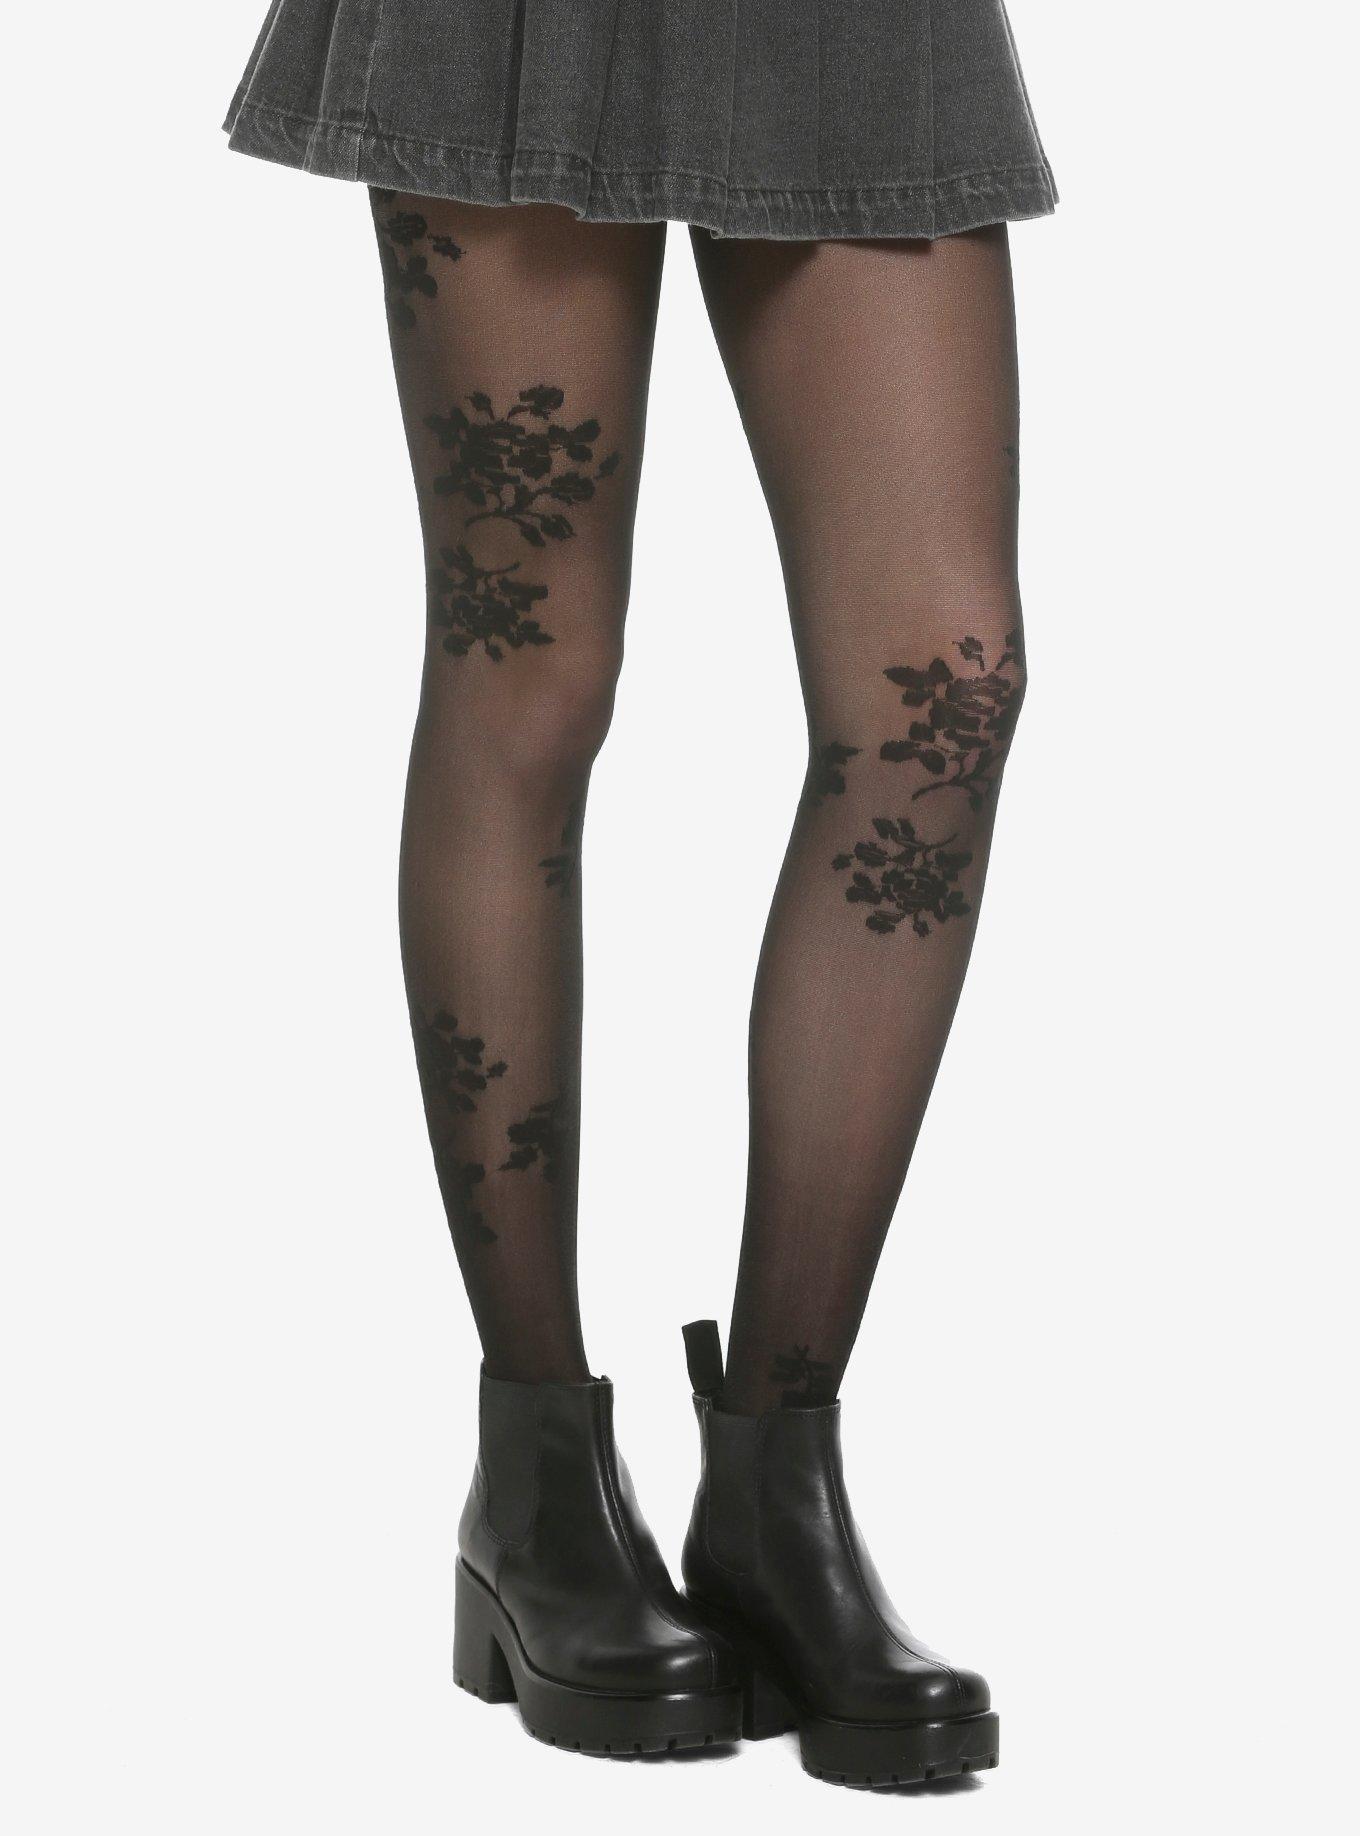 Solid Black Opaque Tights - Hot Topic